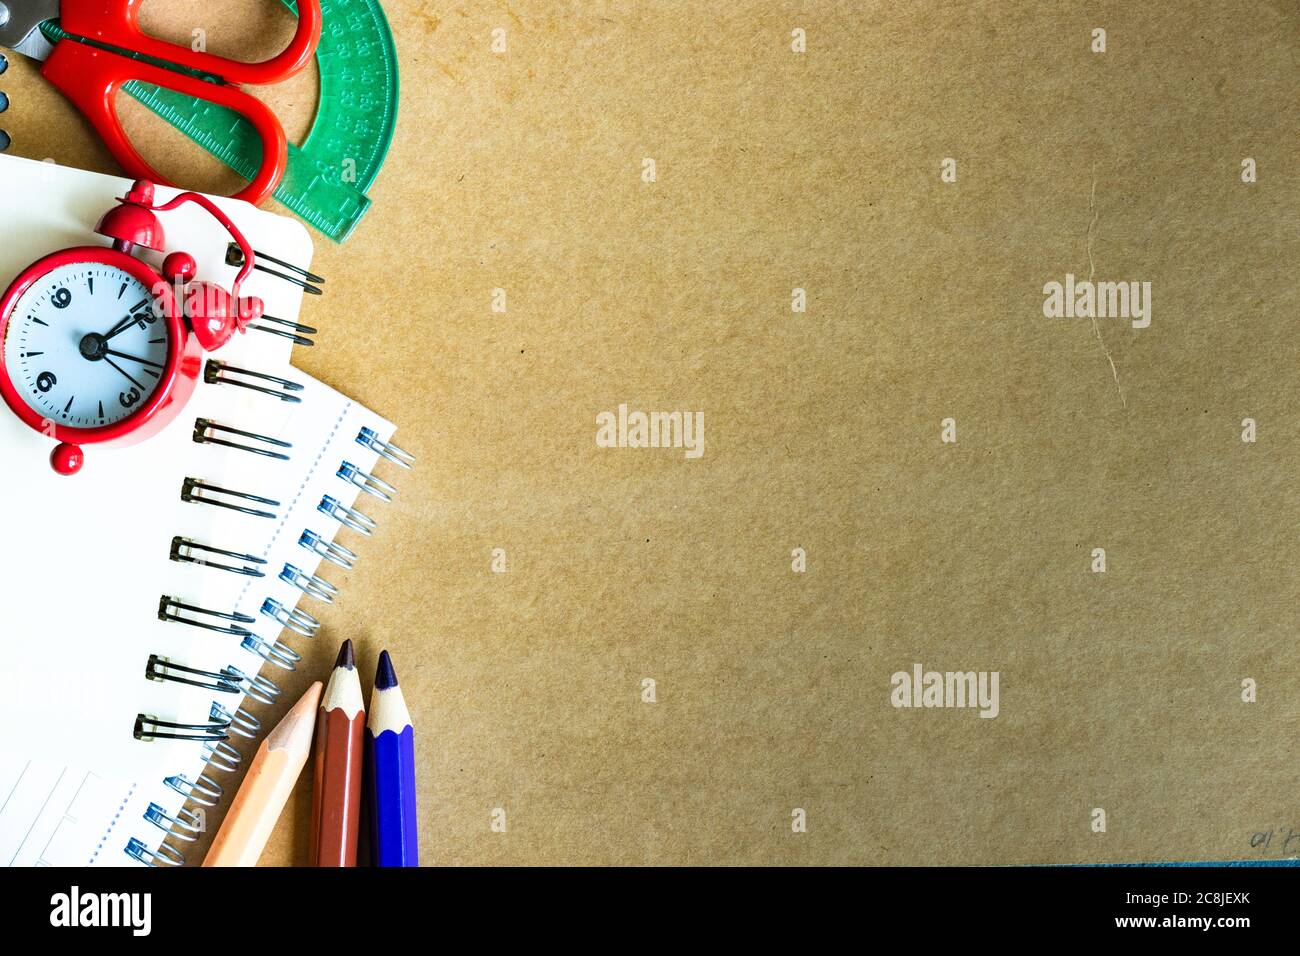 Back to School flatlay on crafted paper background with copy space Stock Photo